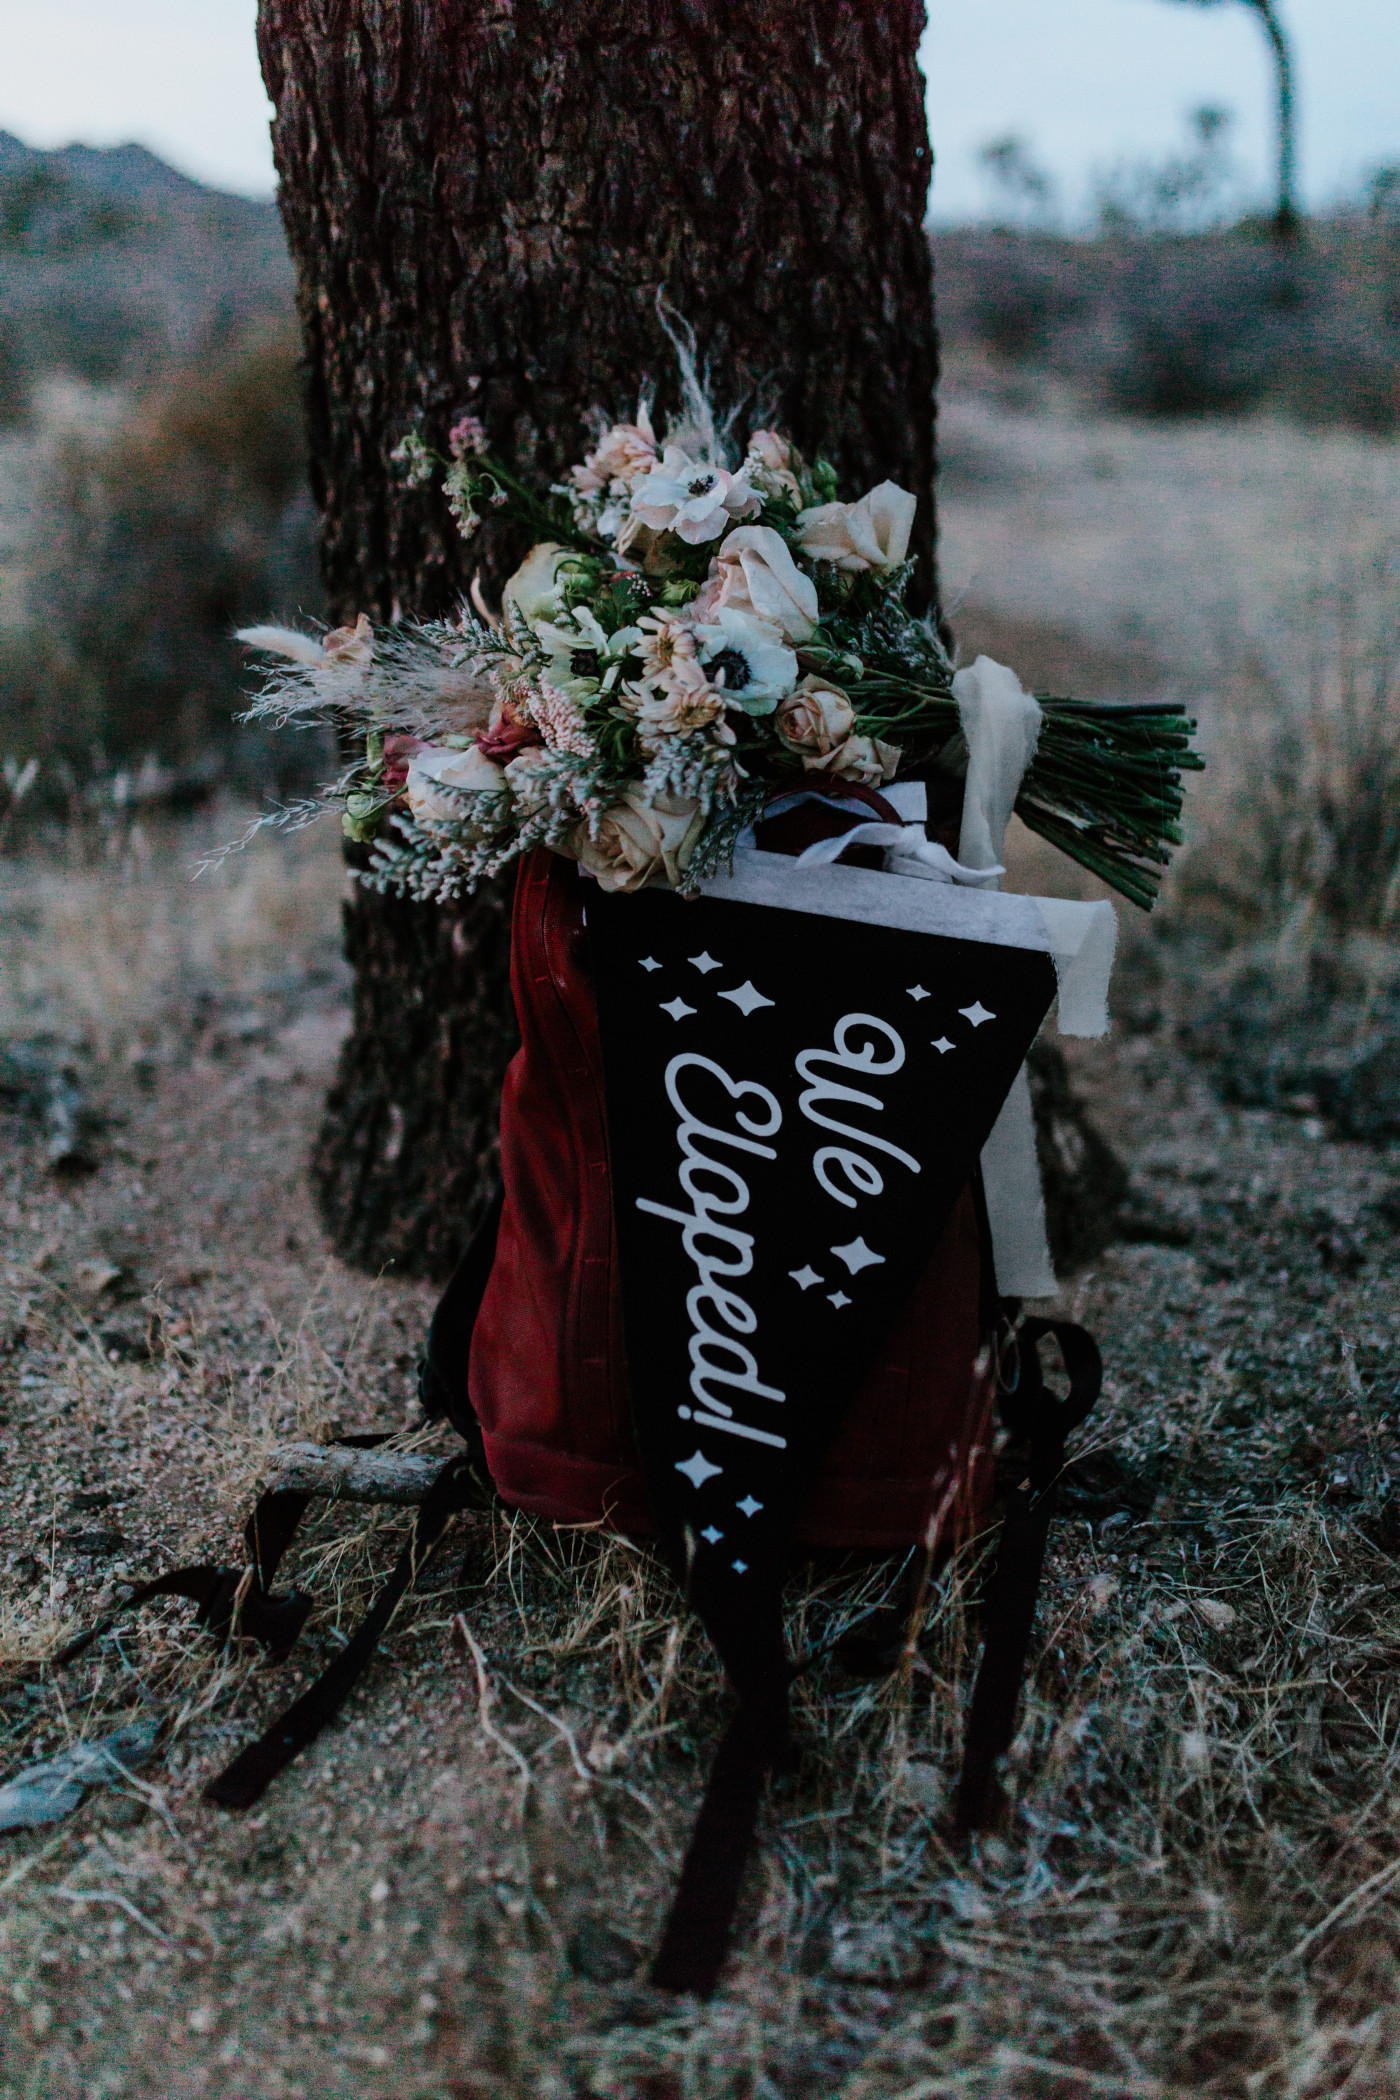 Shelby's flowers and elopement announcement.